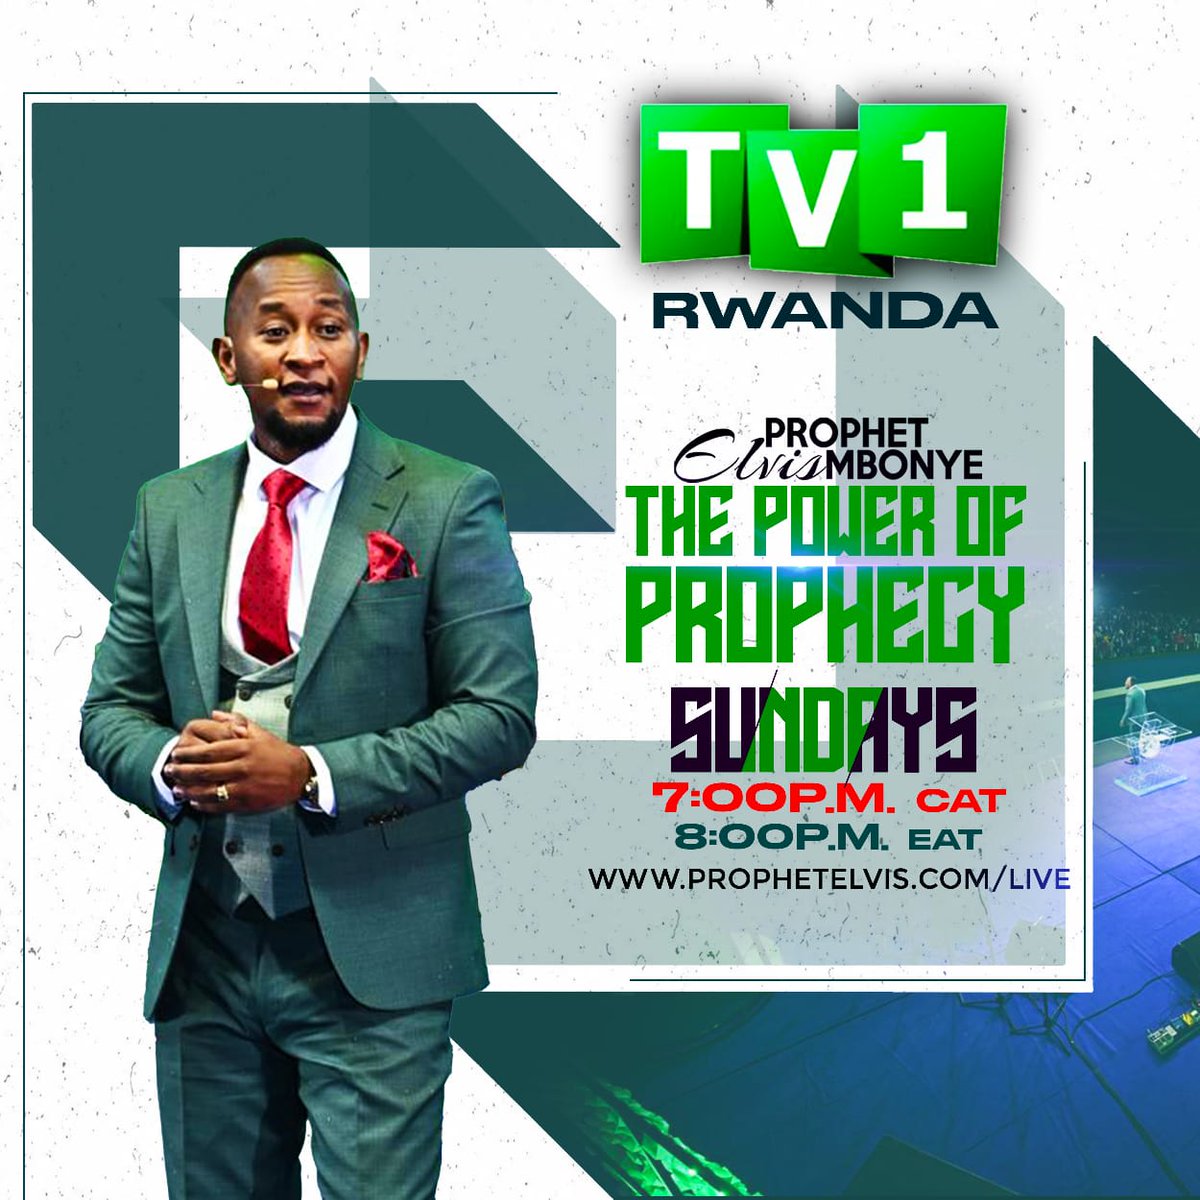 𝗧𝗛𝗘 𝗣𝗢𝗪𝗘𝗥 𝗢𝗙 𝗣𝗥𝗢𝗣𝗛𝗘𝗖𝗬. Prophet Elvis Mbonye in an epic broadcast Sunday 12th May 2024 at 7pm on TV1.